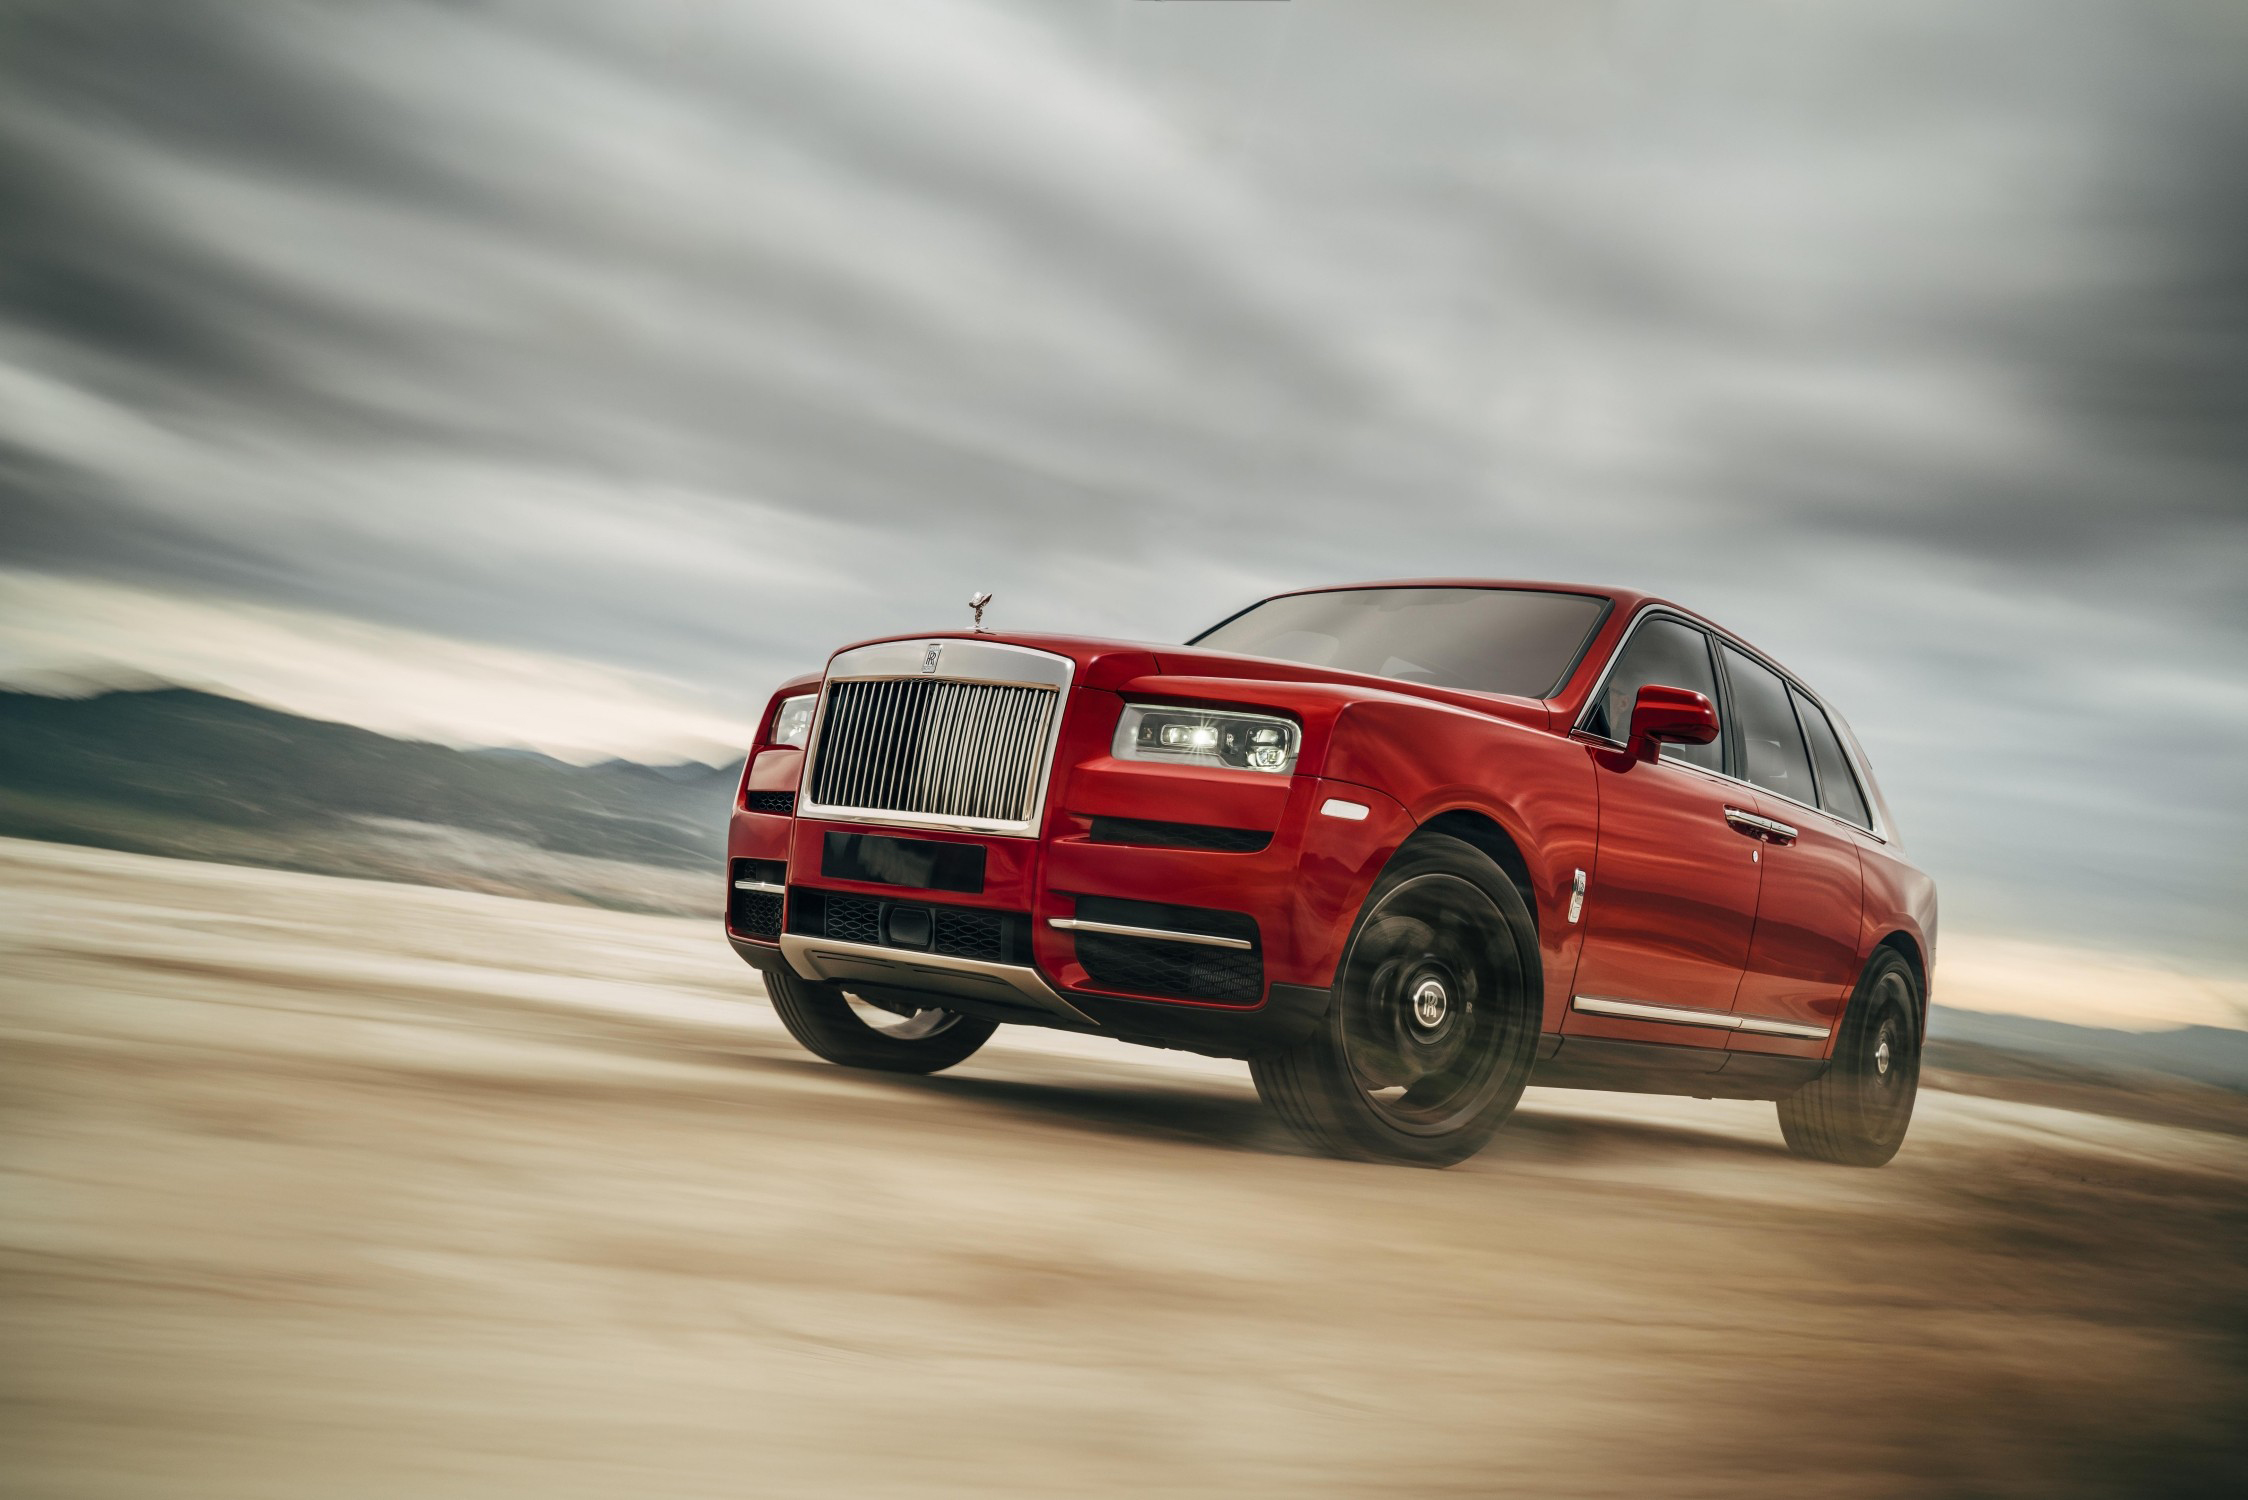 The Launch of the Rolls-Royce Cullinan